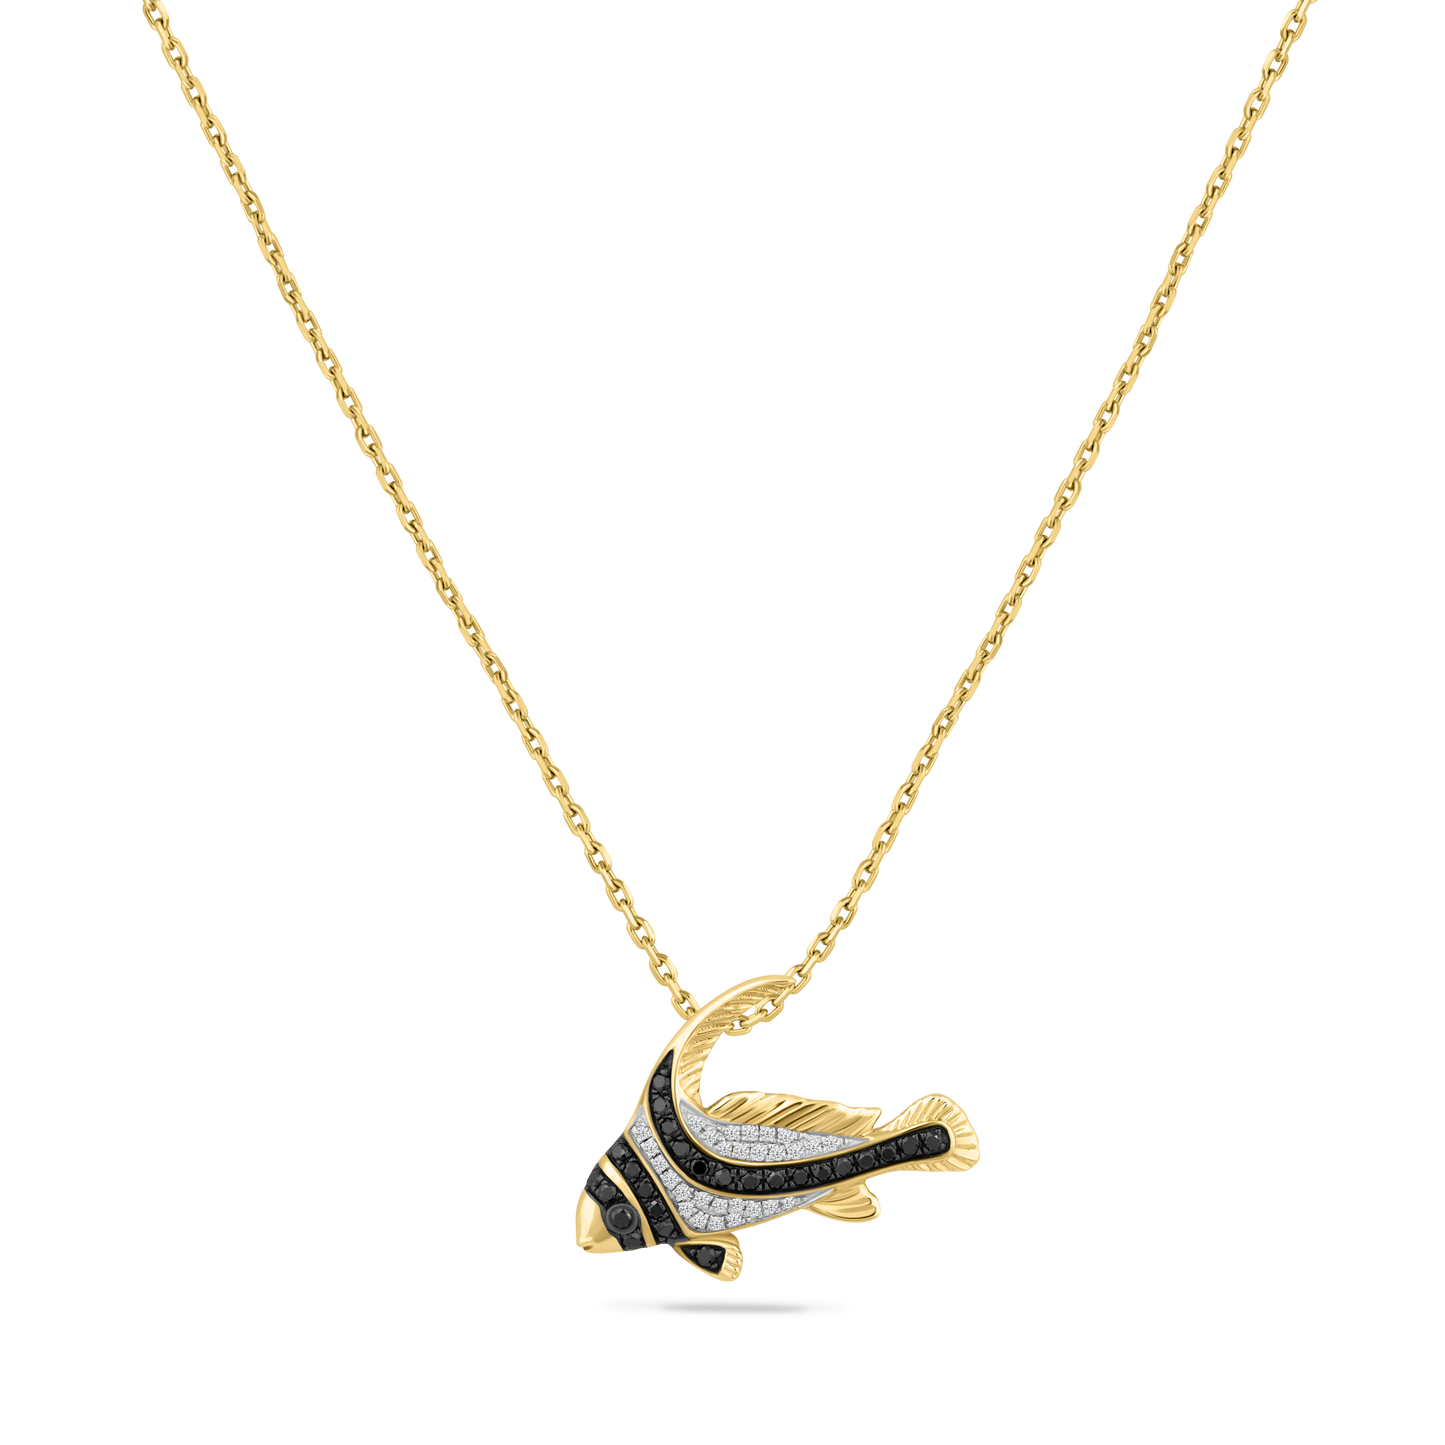 14K SPOTTED FISH PENDANT WITH 28 DIAMONDS 0.11CT & 25 BLACK DIAMONDS 0.19CT. 12MM X 22MM ON 18 INCHES CHAIN